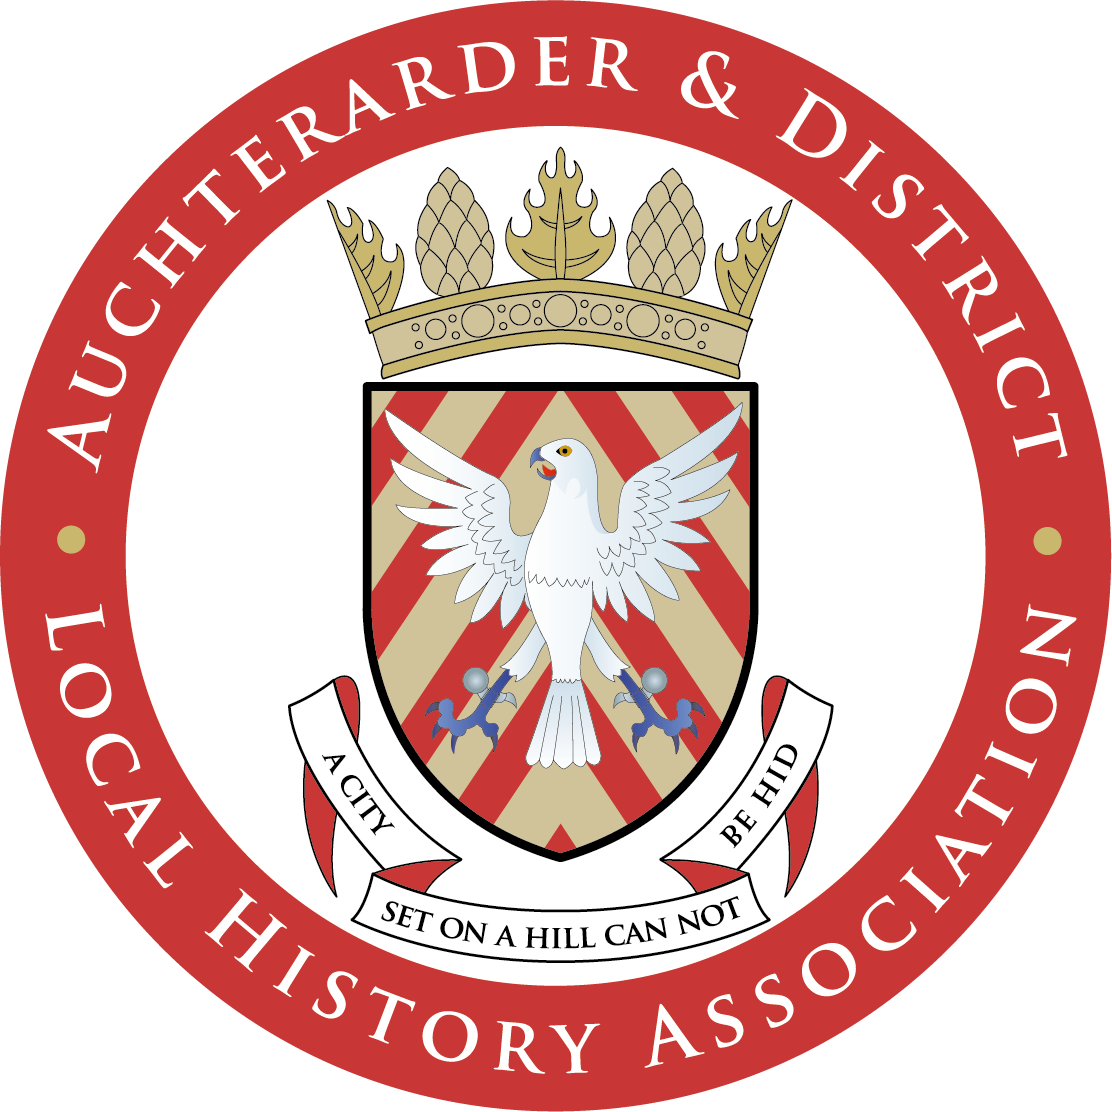 Auchterarder and District History Association